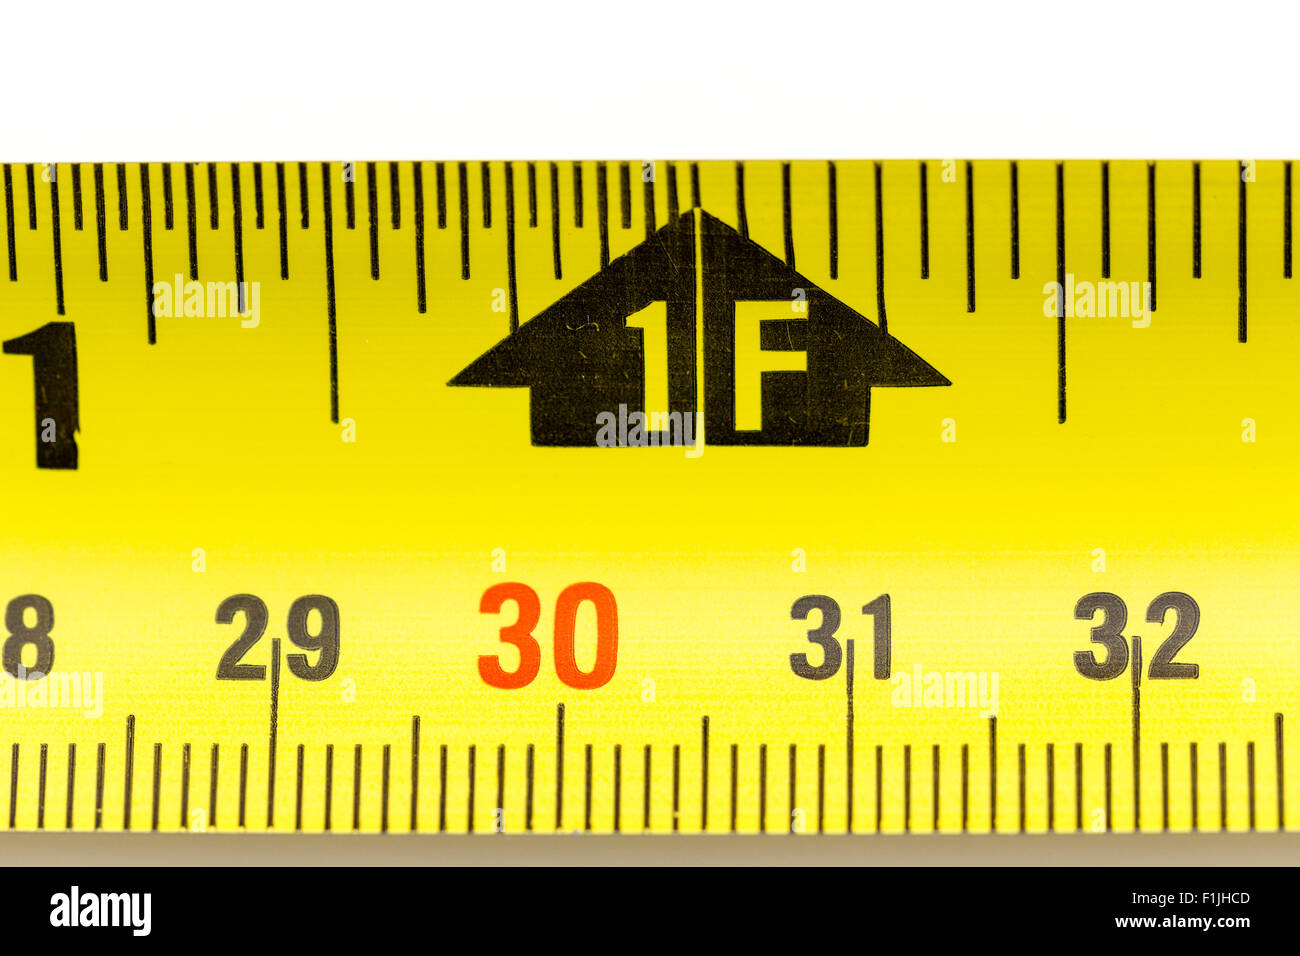 Rulers. Steel roller tape measure, 29-32cm and 1 ft with black arrow  marking. 30 centimeter marking in red. Close up Stock Photo - Alamy